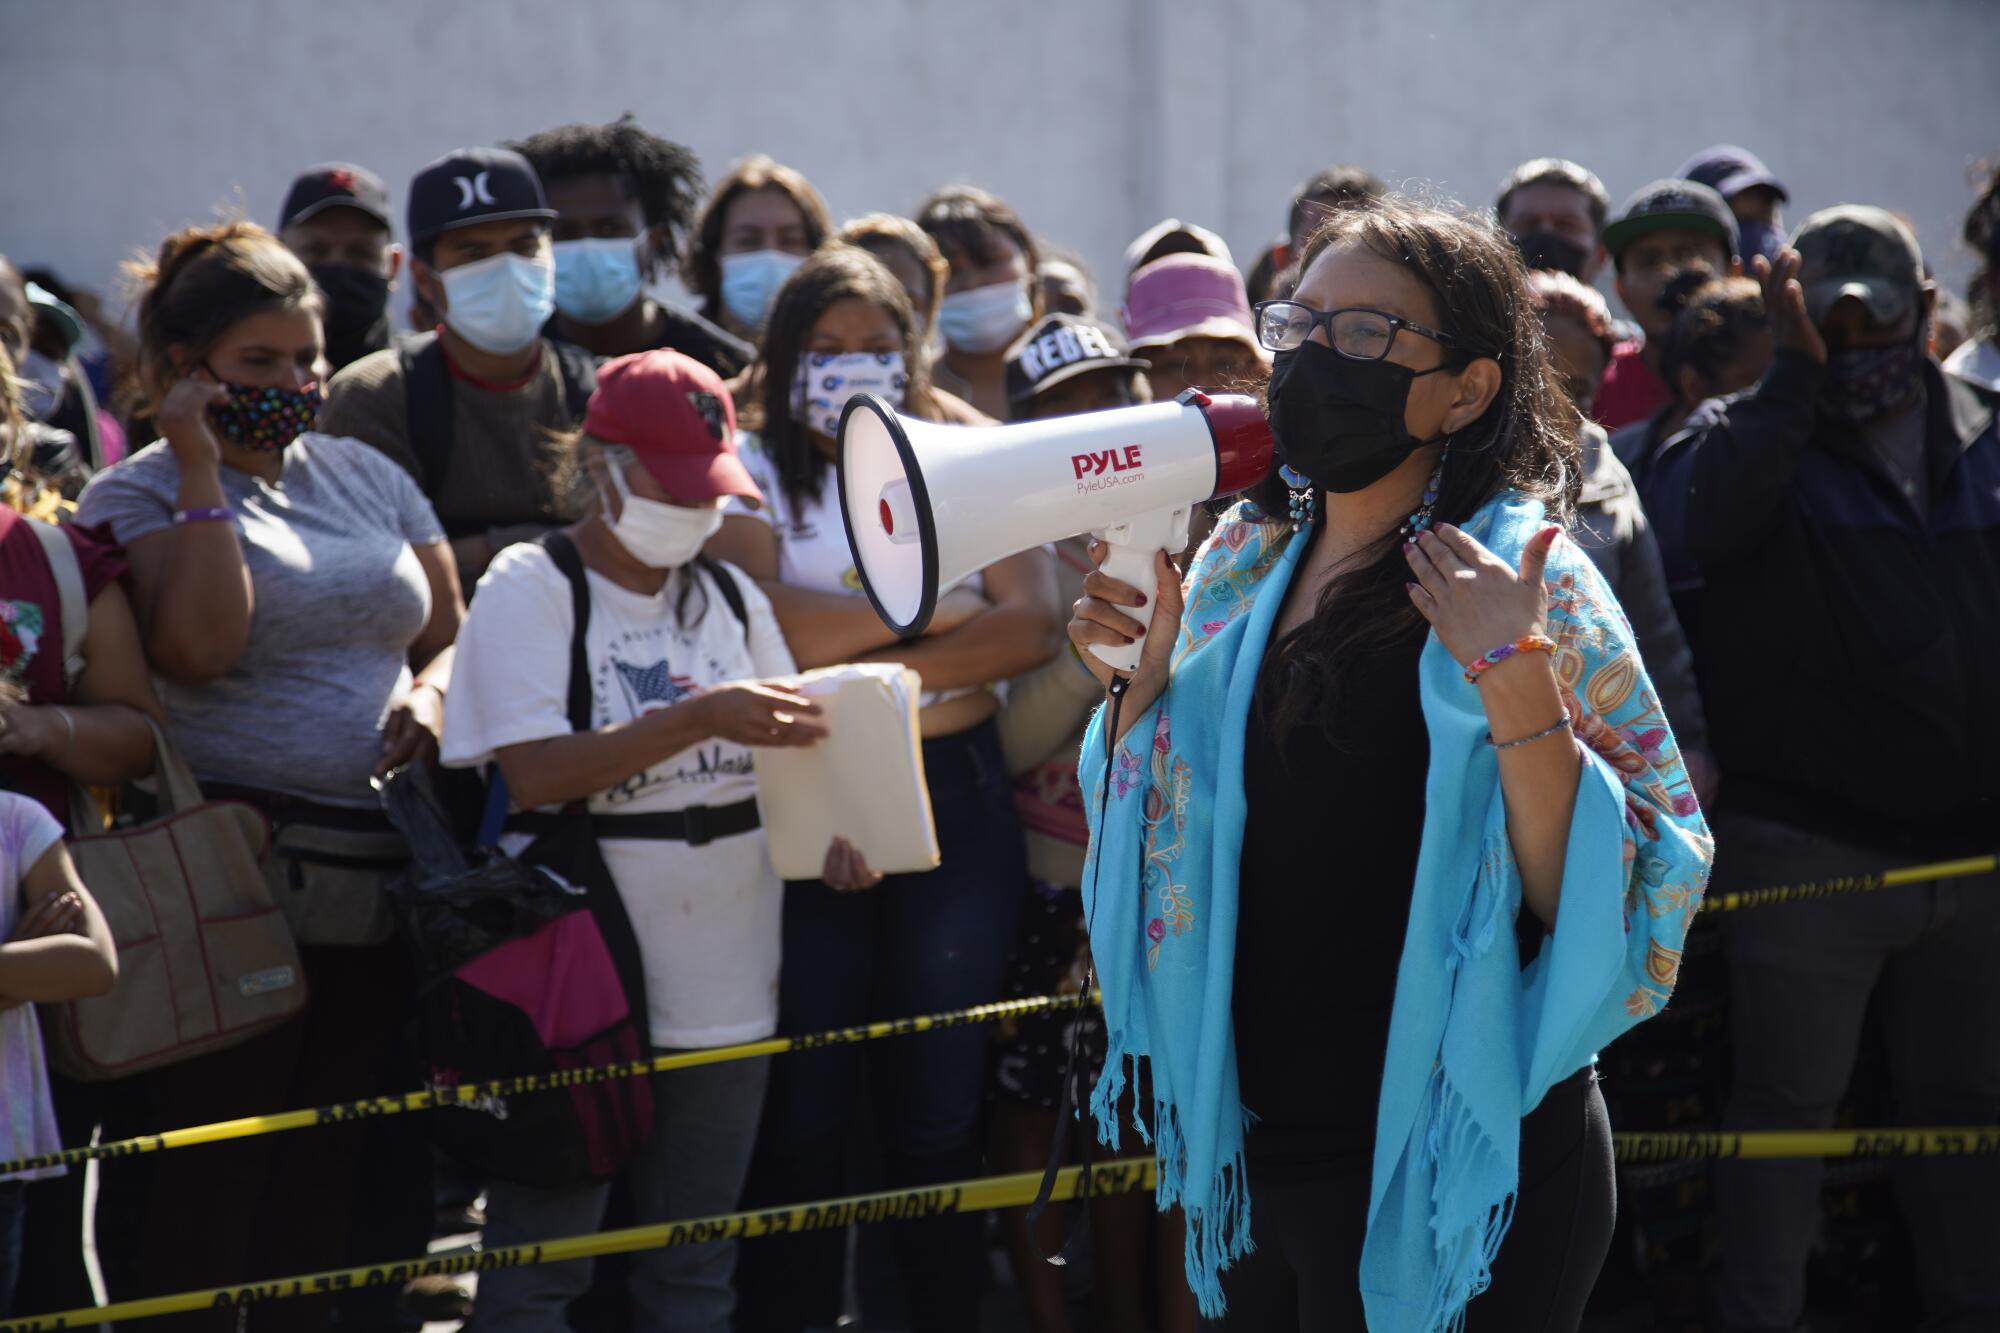 A woman with a megaphone speaks to a group of people.